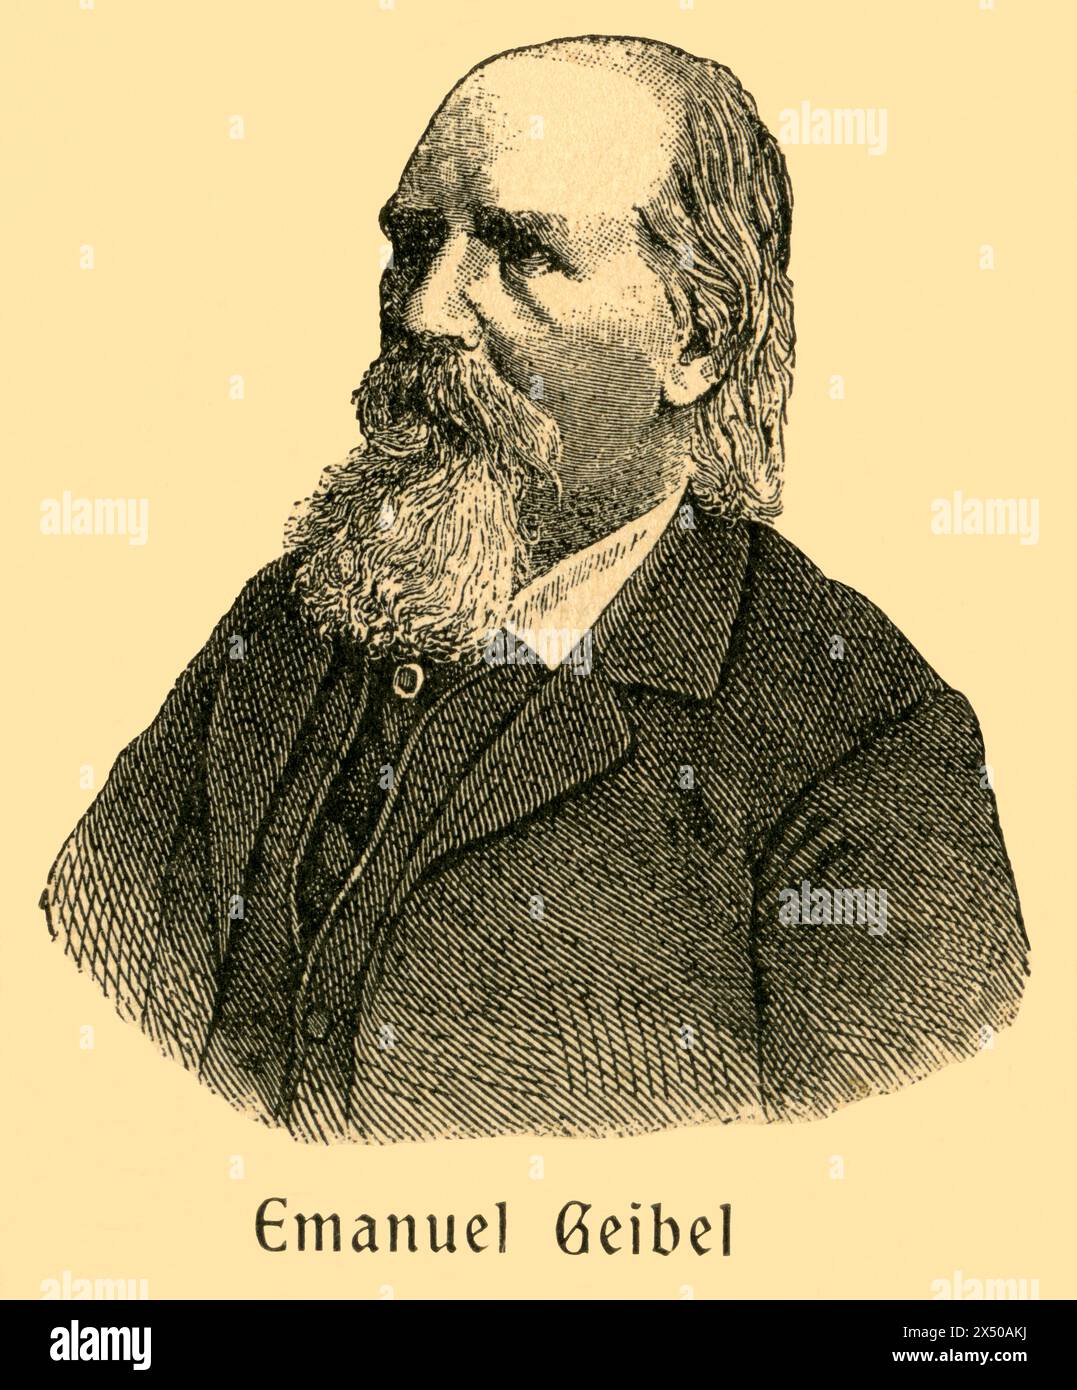 Emanuel Geibel, German writer, ARTIST'S COPYRIGHT HAS NOT TO BE CLEARED Stock Photo